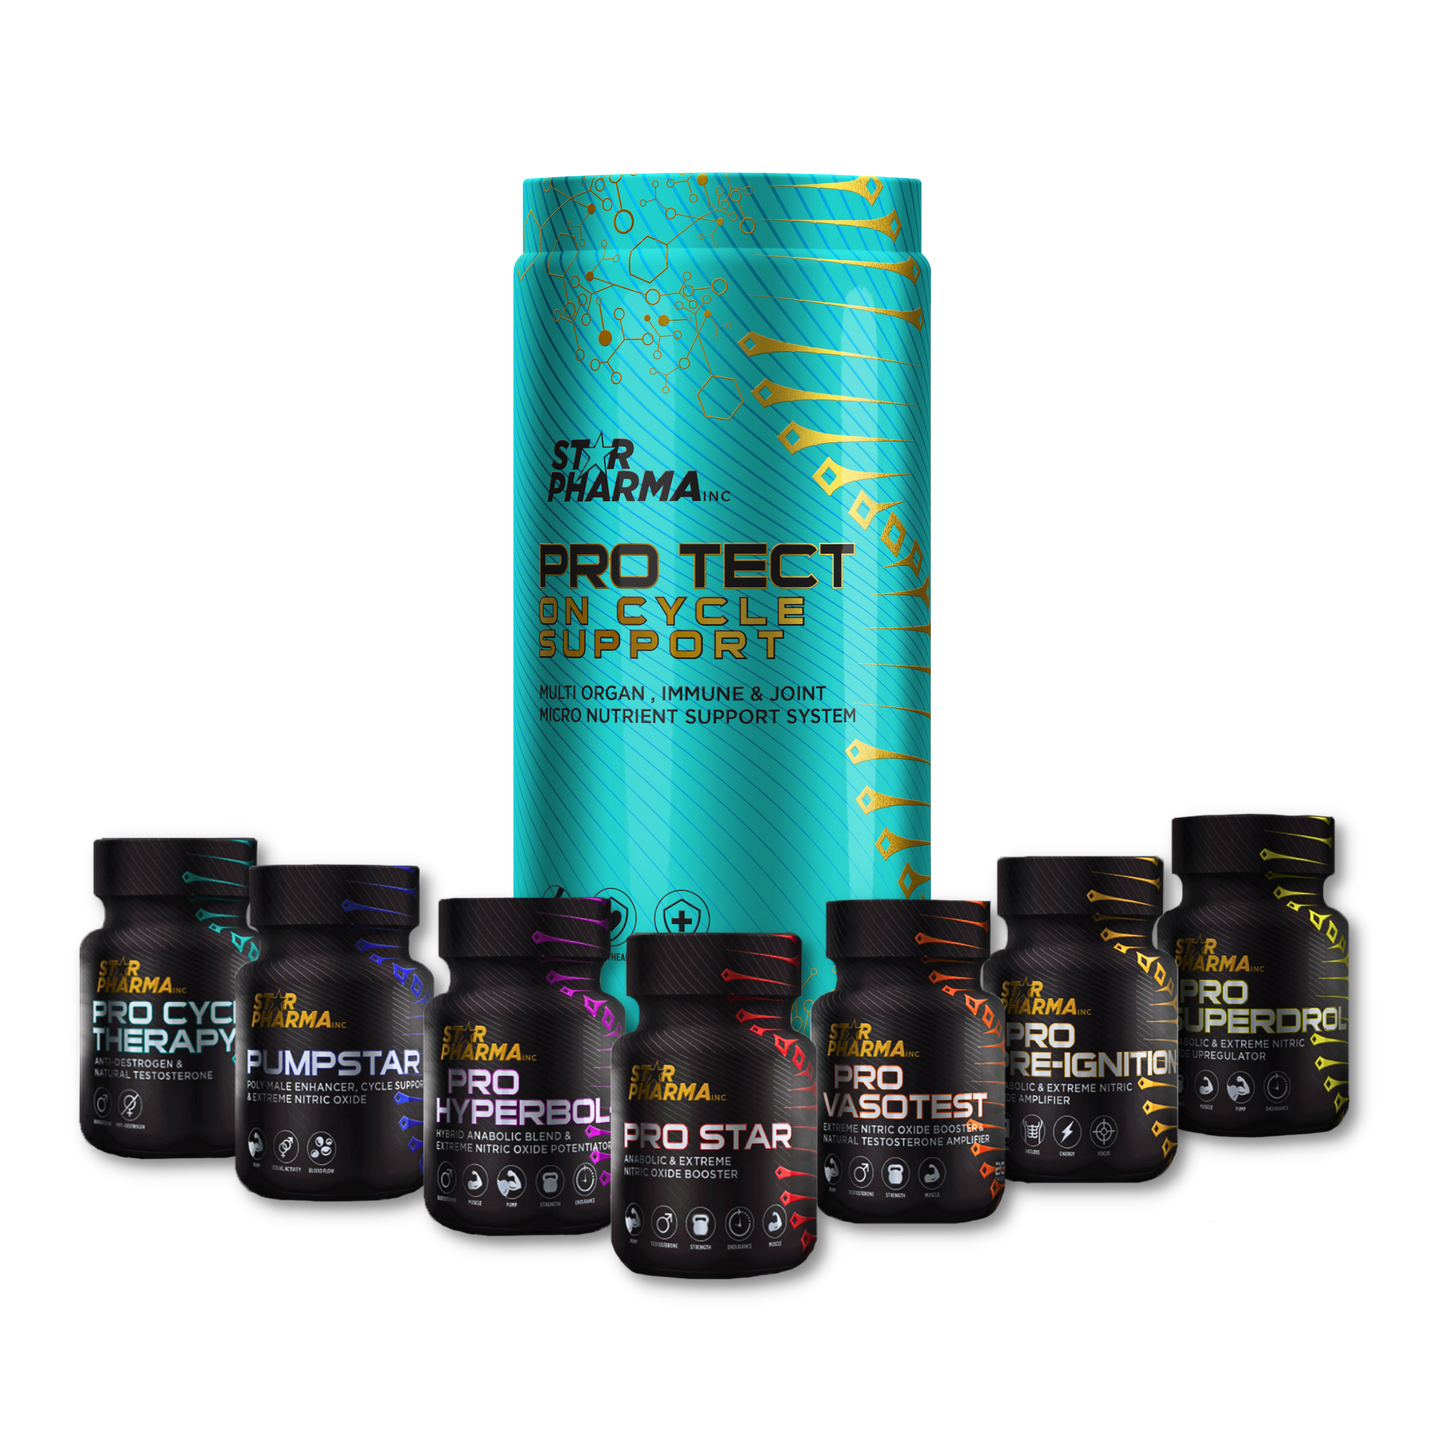 Pro Tect On Cycle Support + 1 Stealth Series